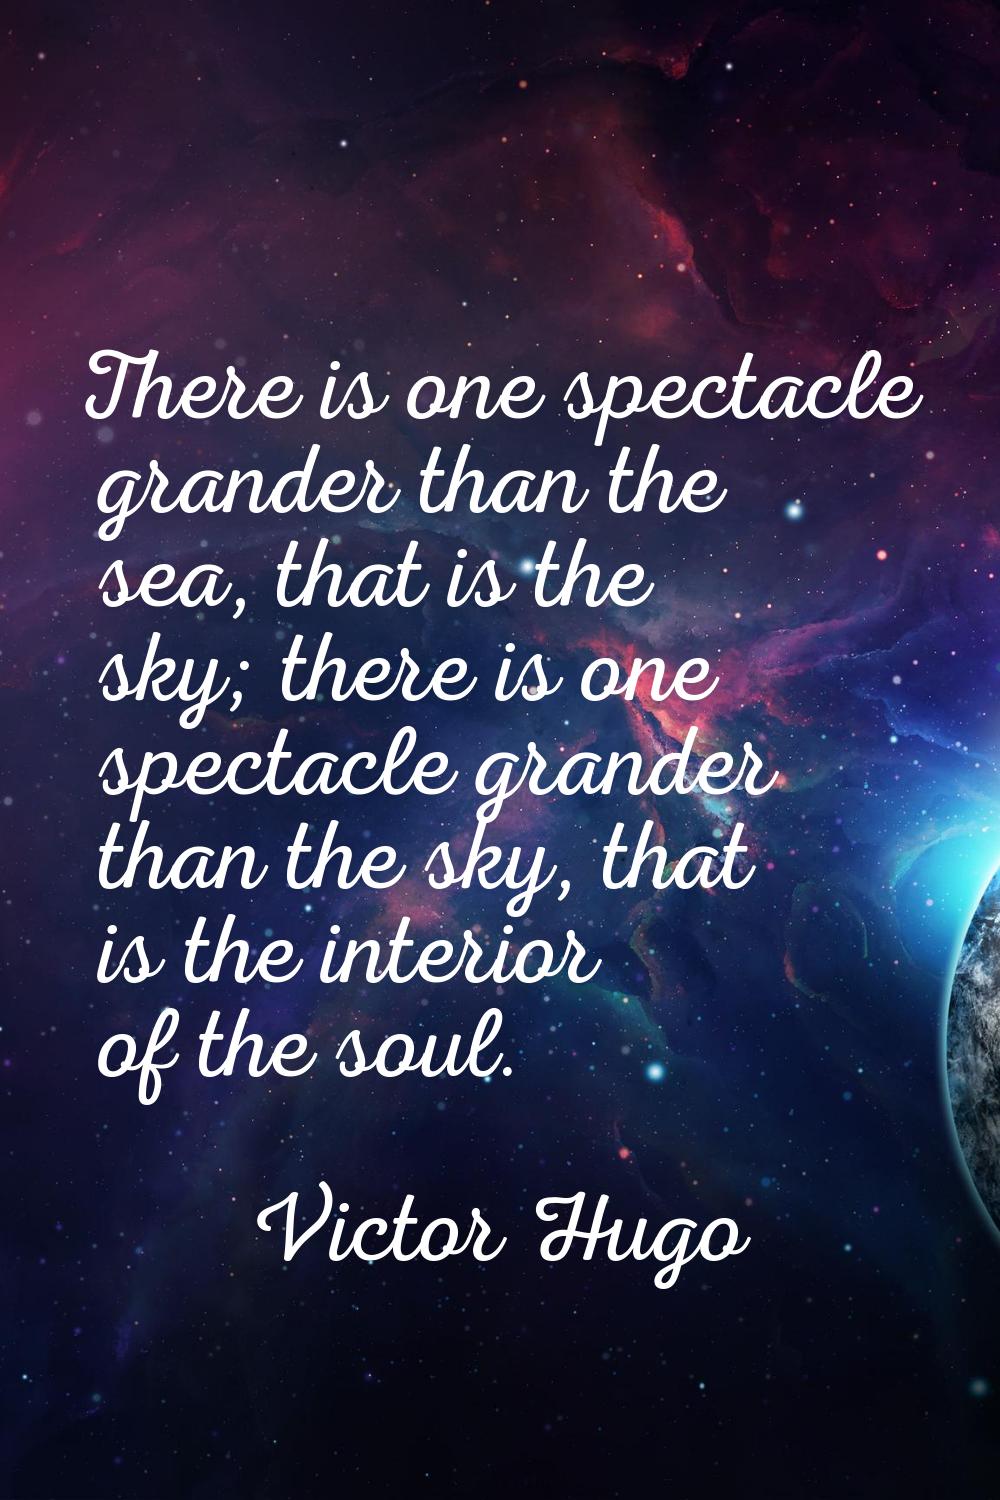 There is one spectacle grander than the sea, that is the sky; there is one spectacle grander than t